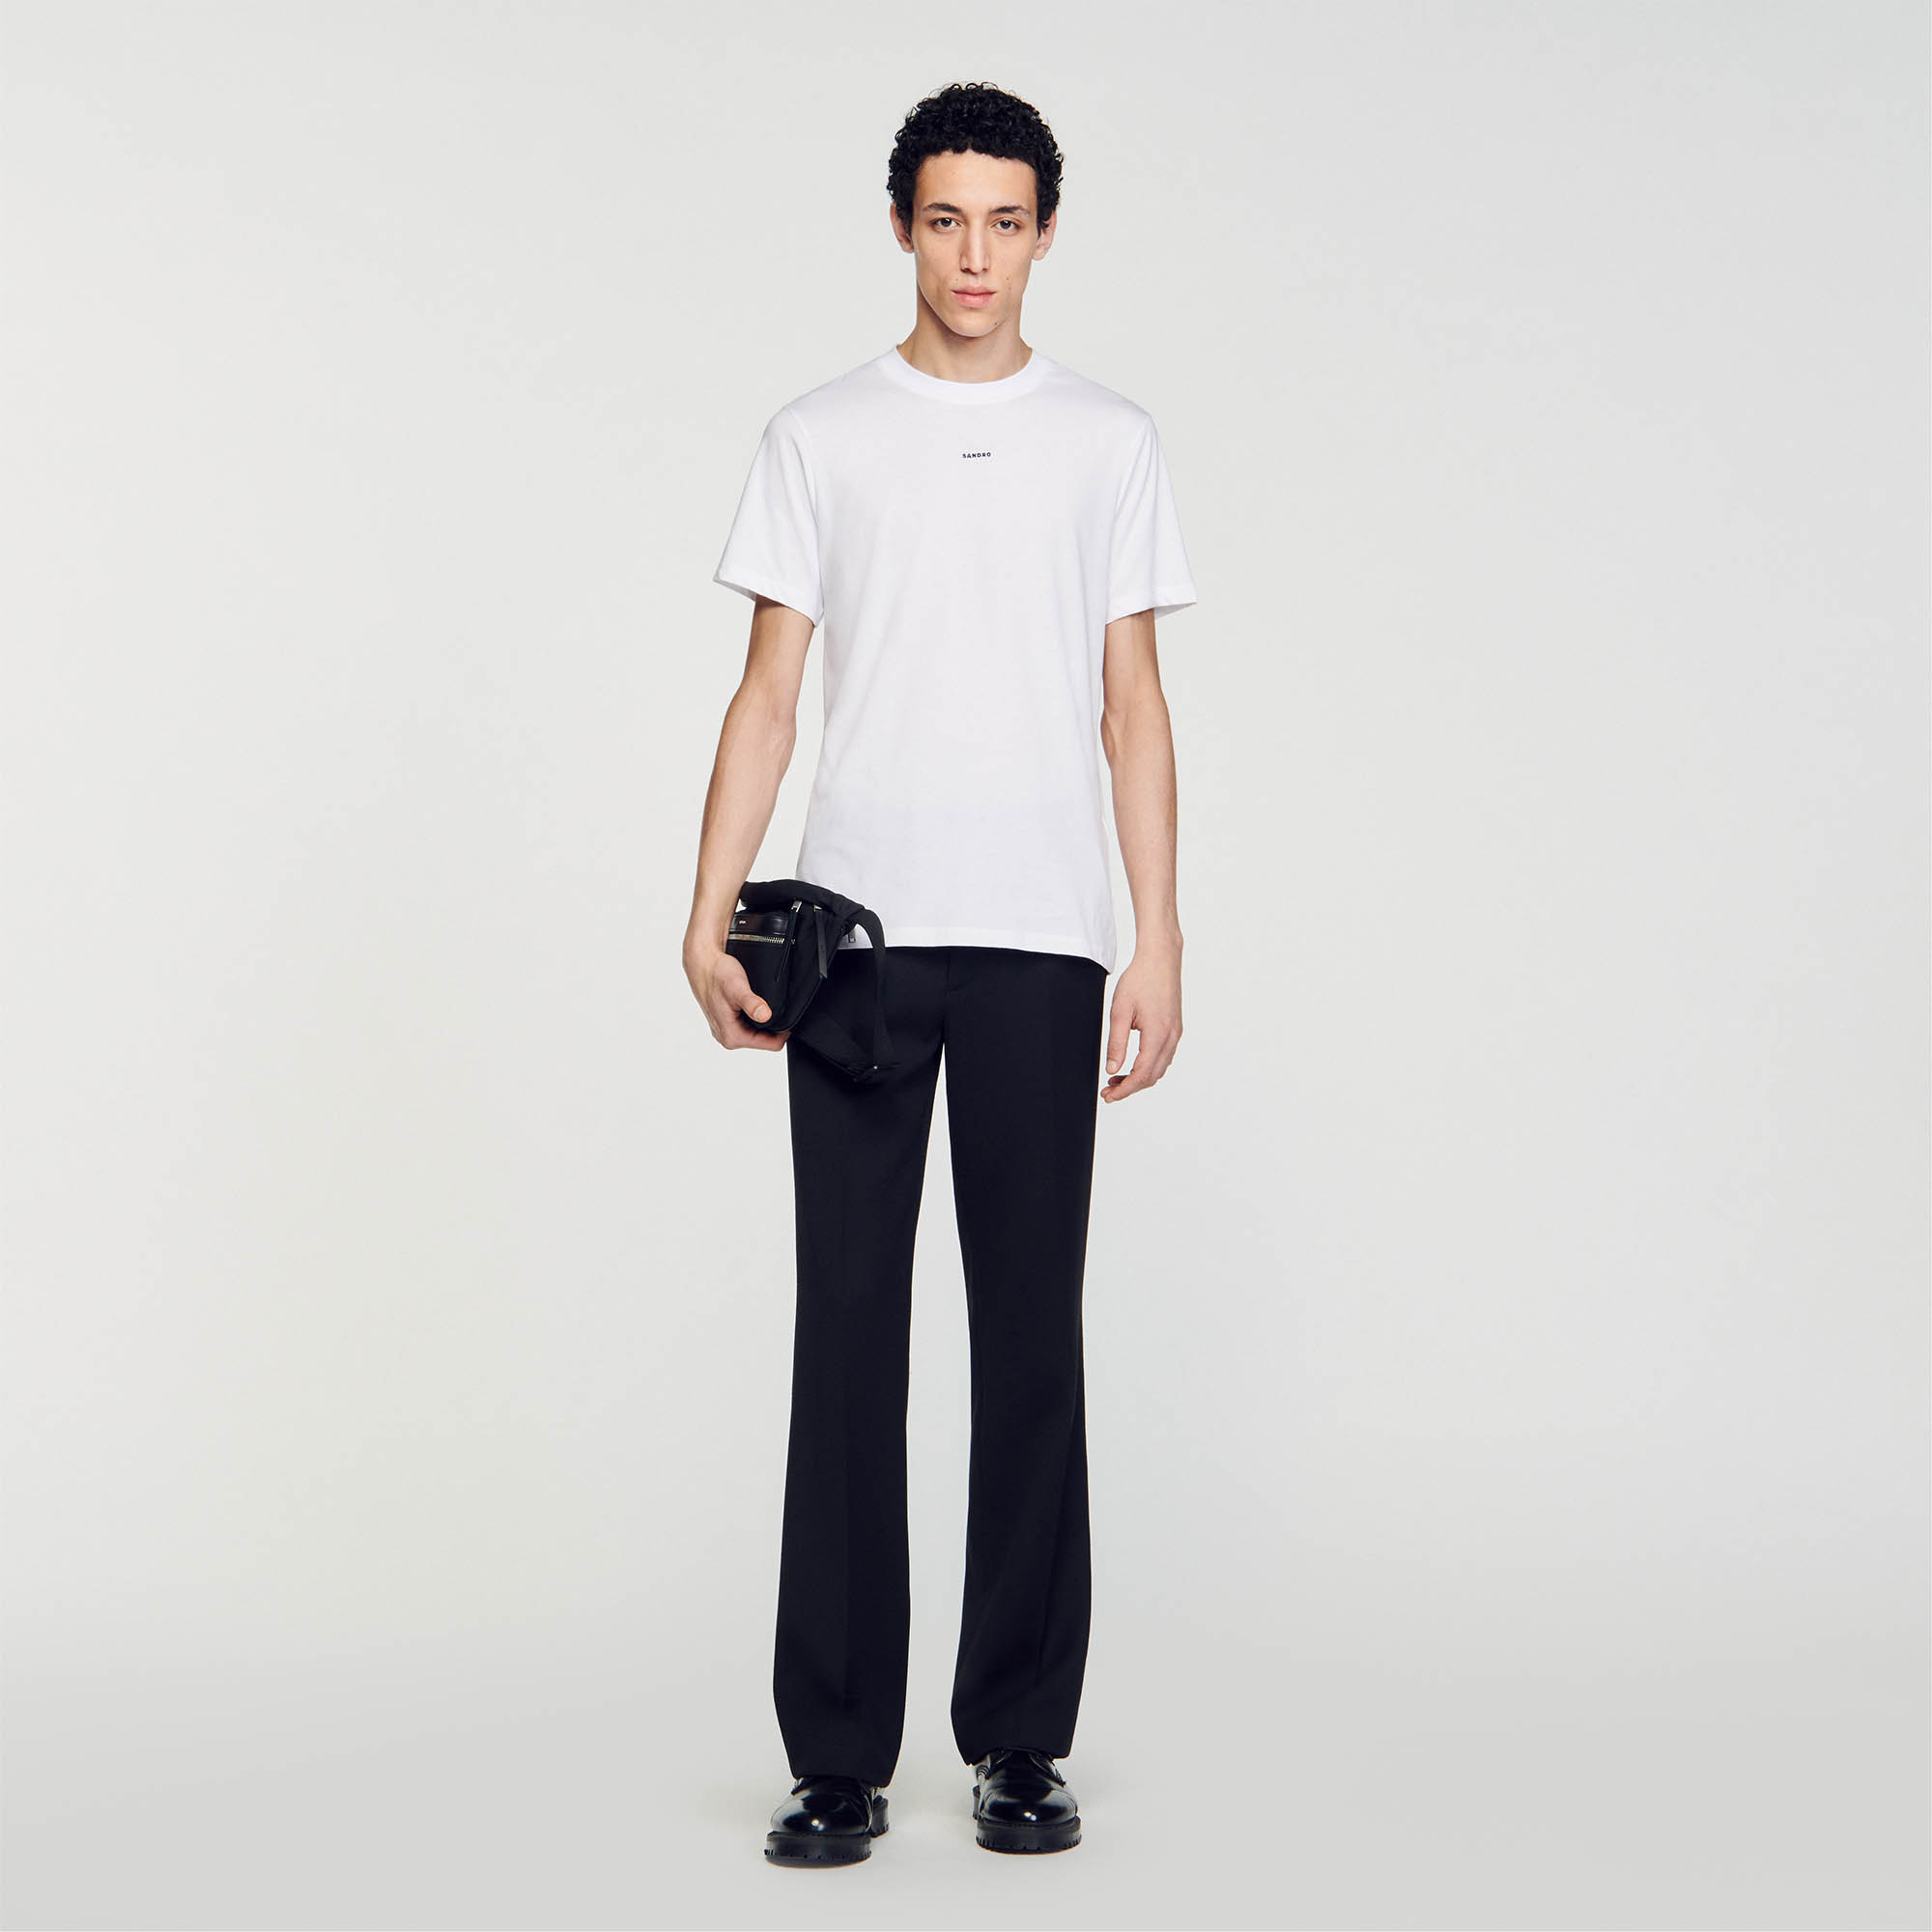 Sandro cotton Rib: T-shirt with a round neck and short sleeves decorated with Sandro embroidery